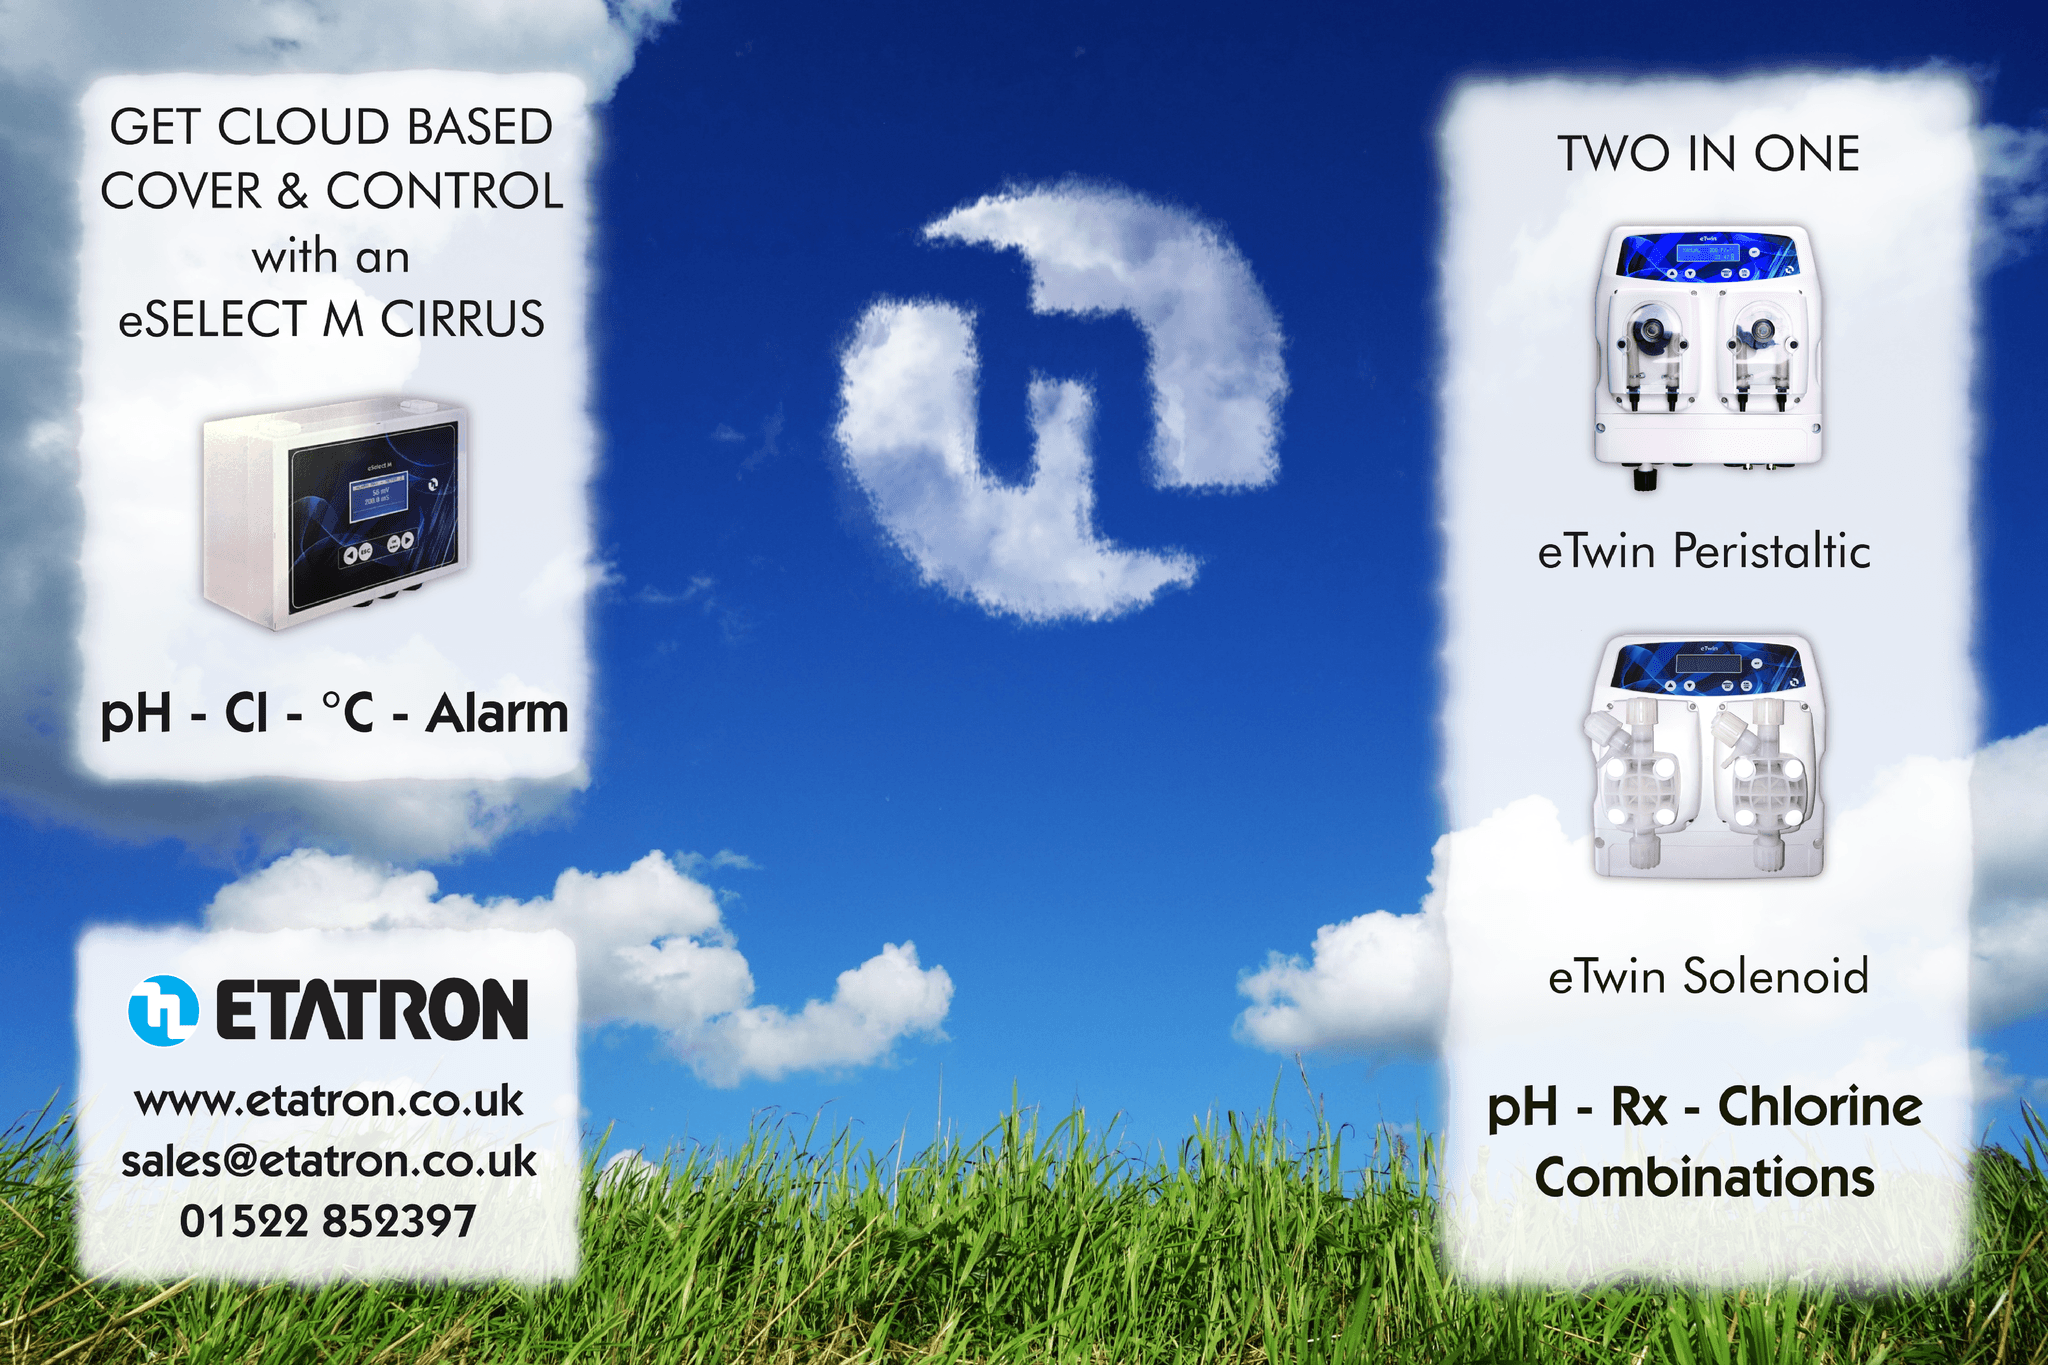 New Products From Etatron